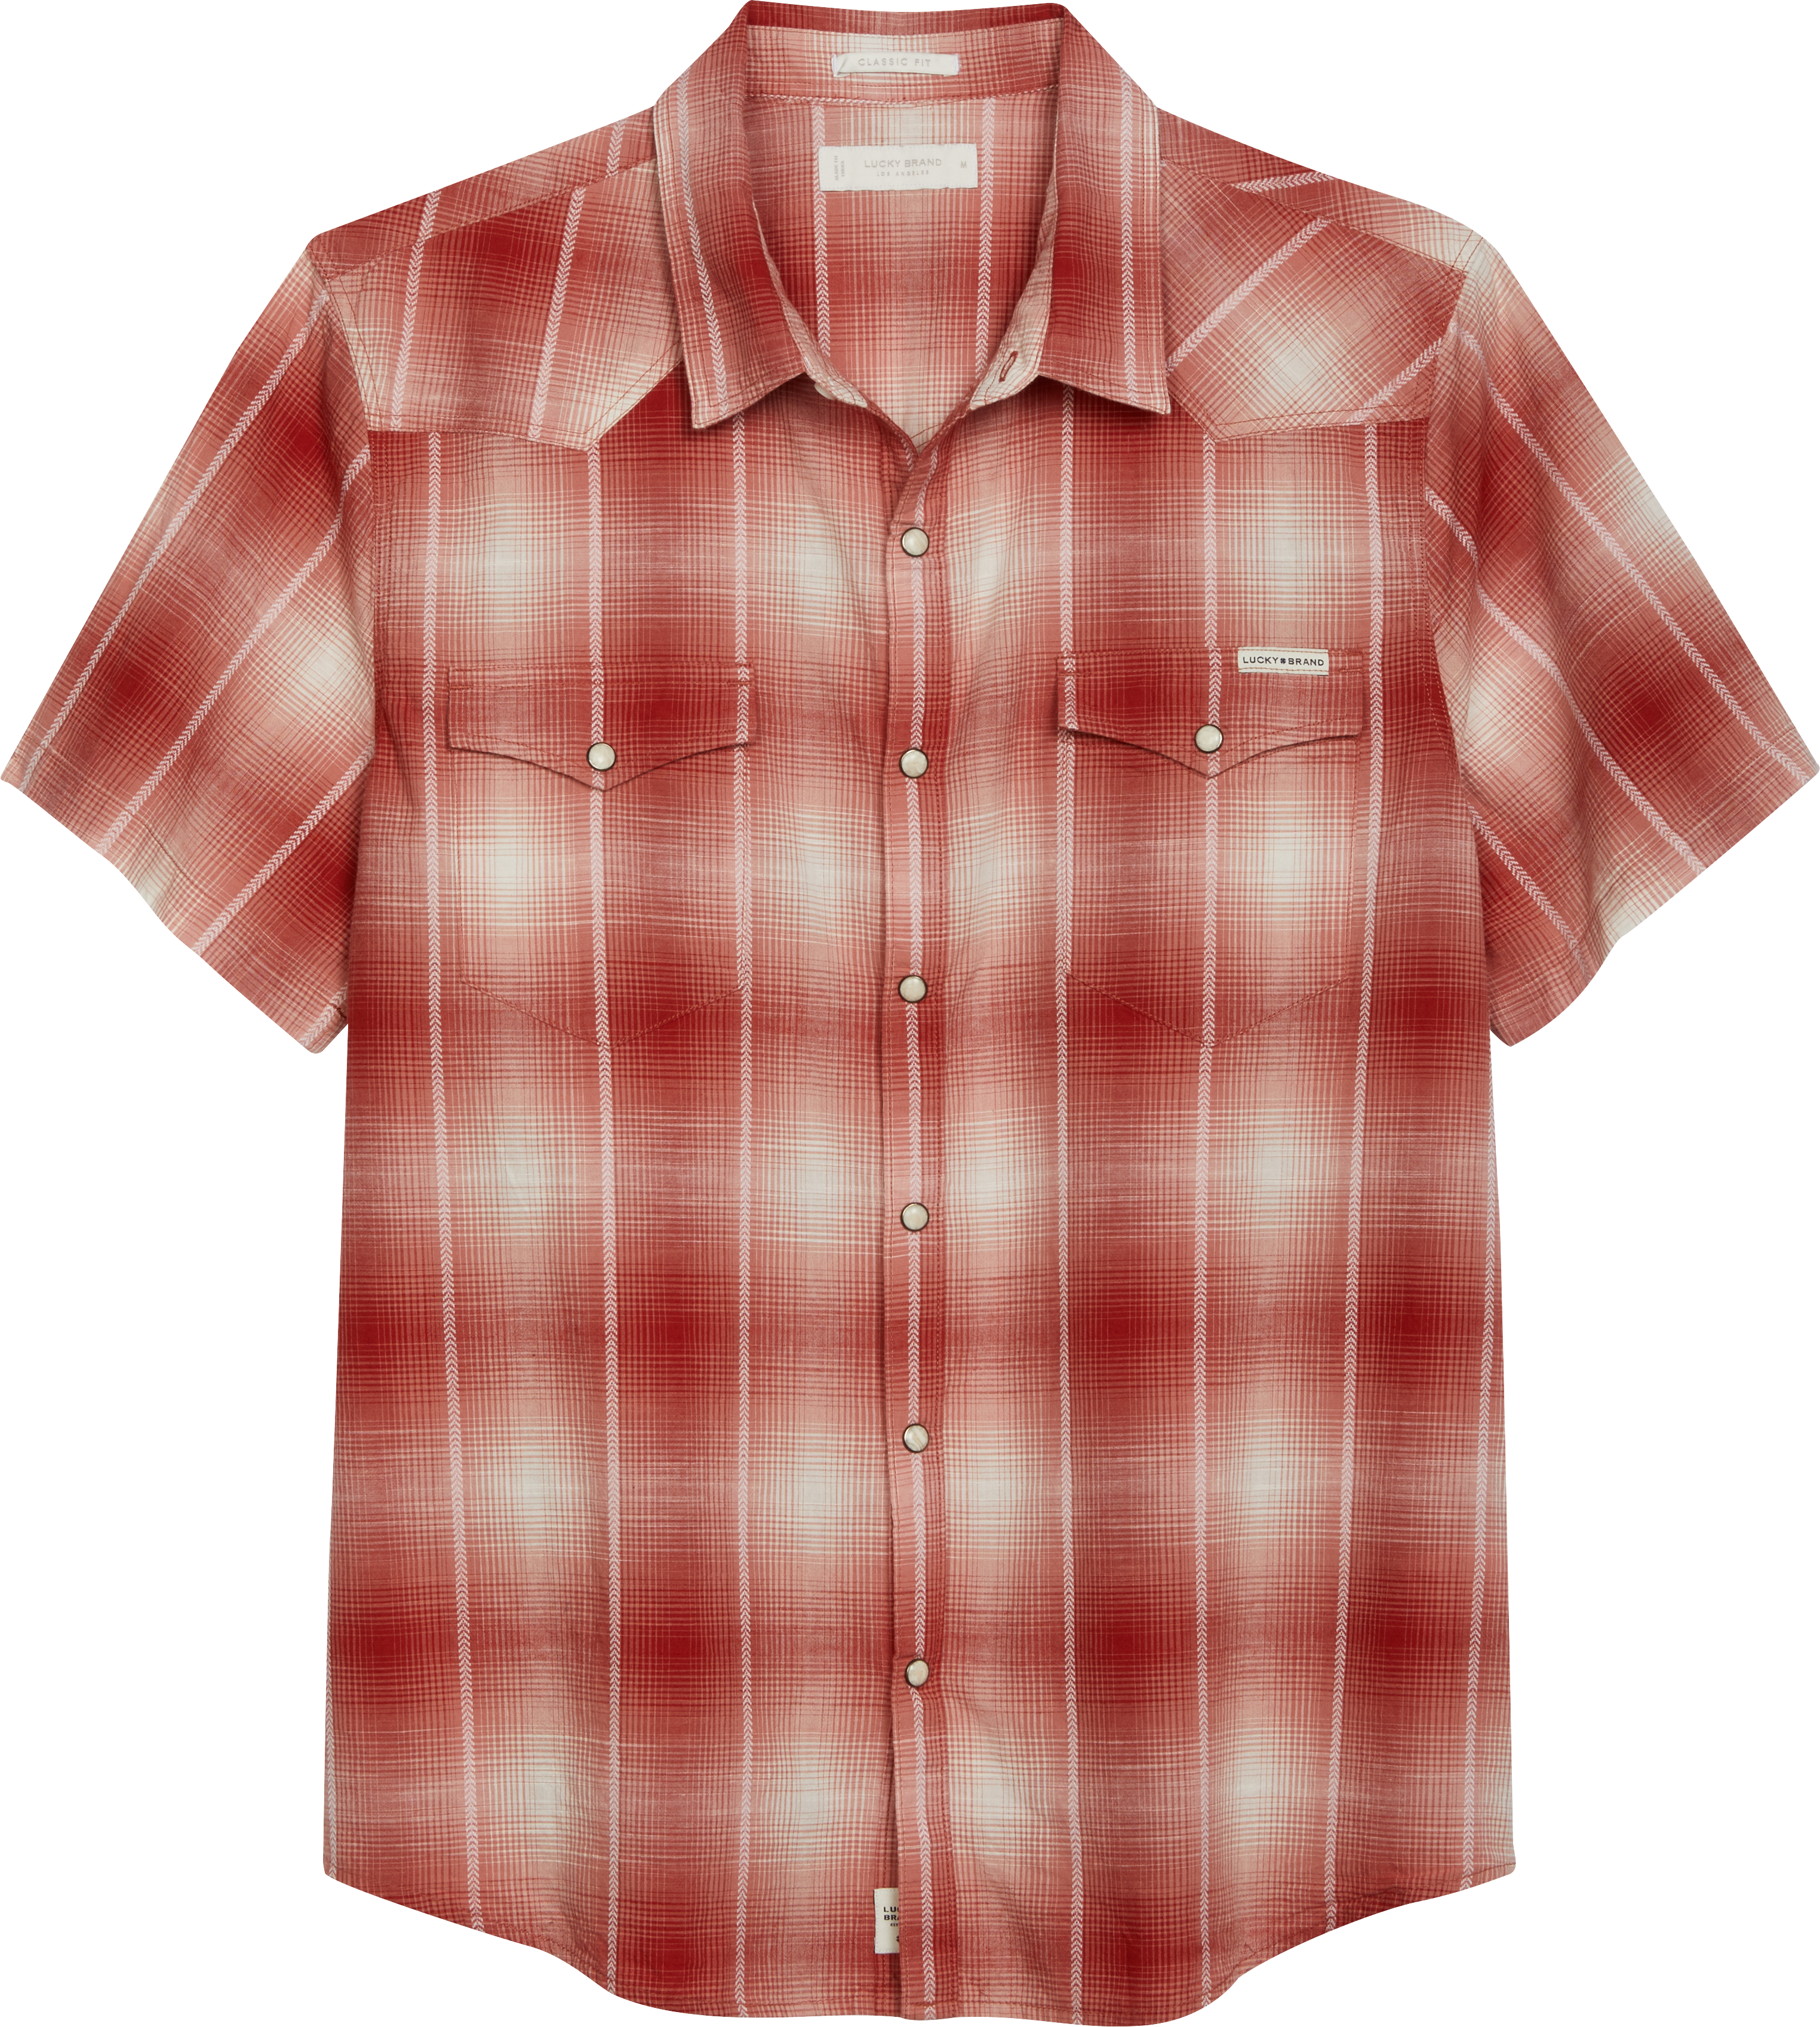 https://image.menswearhouse.com/is/image/TMW/TMW_6NJM_11_LUCKY_BRAND_SPORT_SHIRTS_RED_MAIN